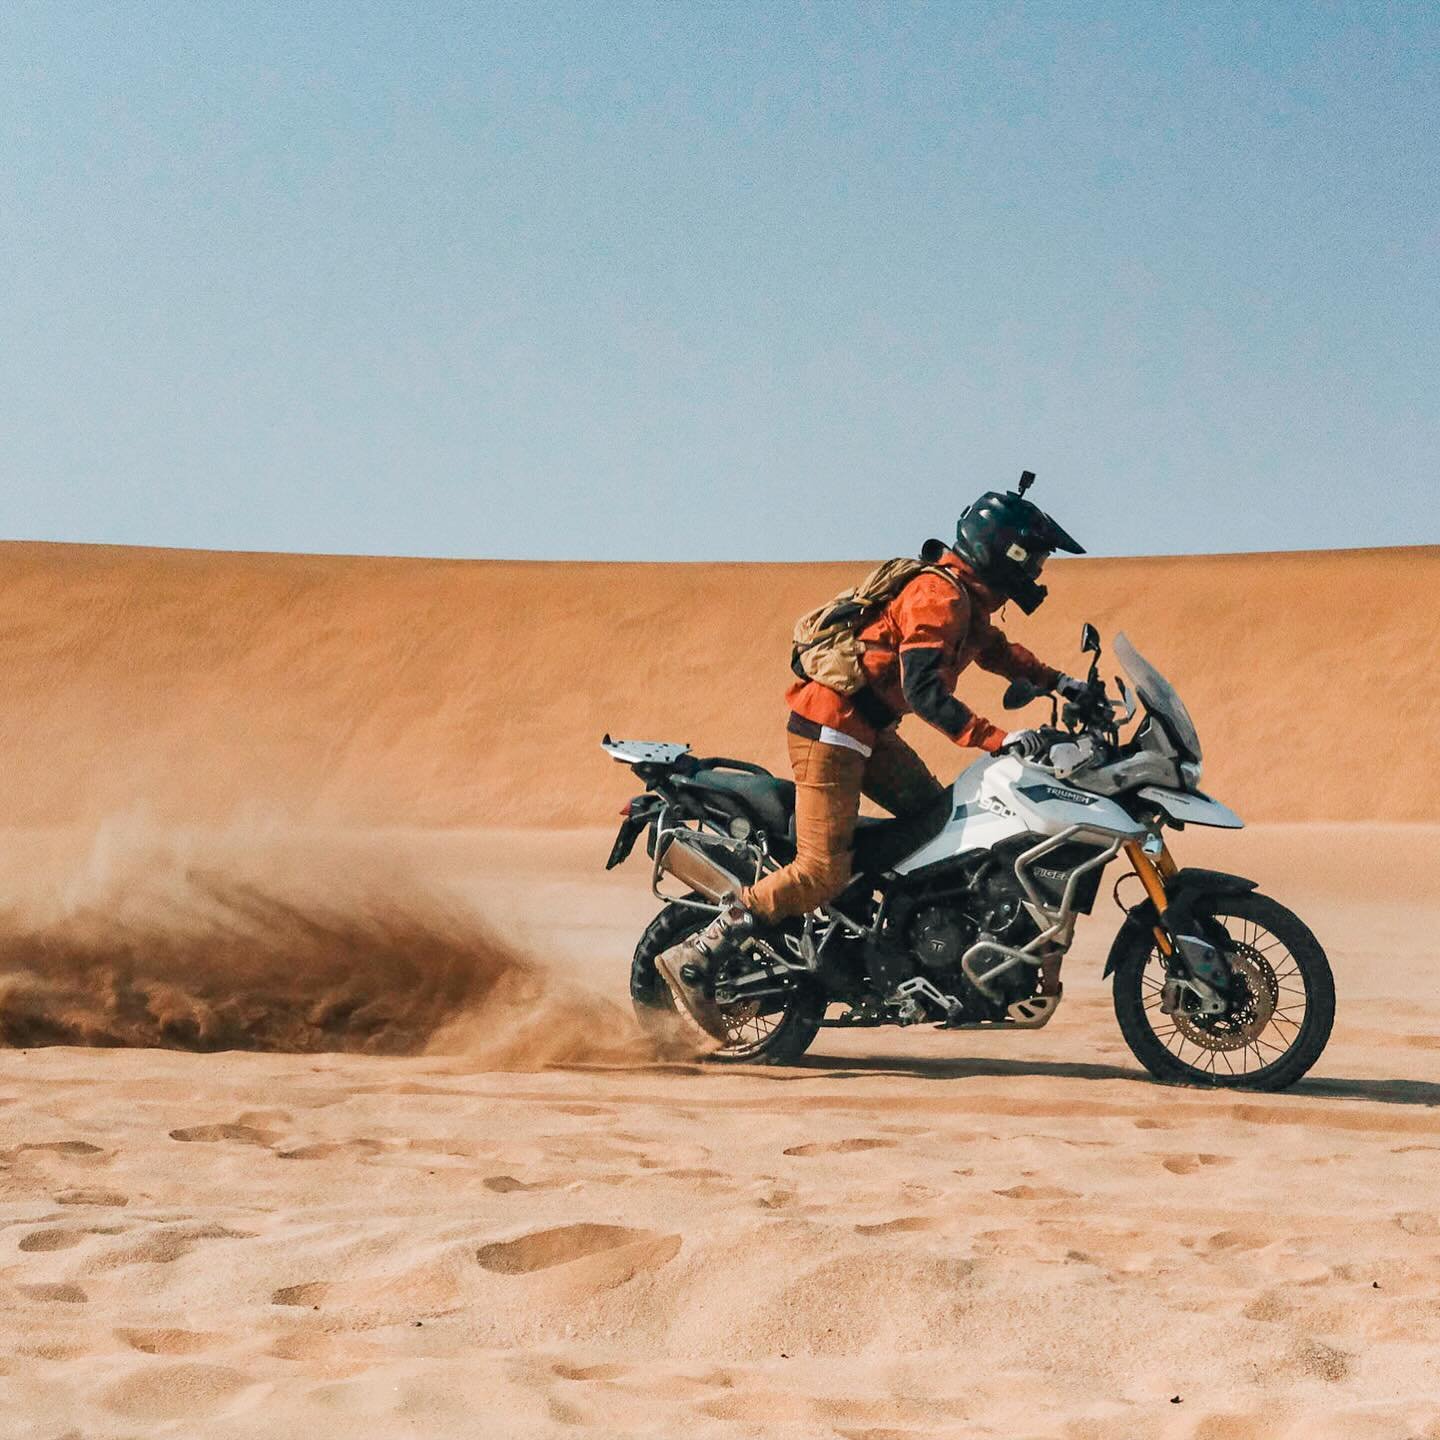 Make sand your friend 🇳🇦

No better way to overcome a fear of sand than by facing it head on in Namibia.

Three tips to get you through it:
&bull; Get your weight back
&bull; Look up to where you want to go, not down at your front wheel
&bull; The 